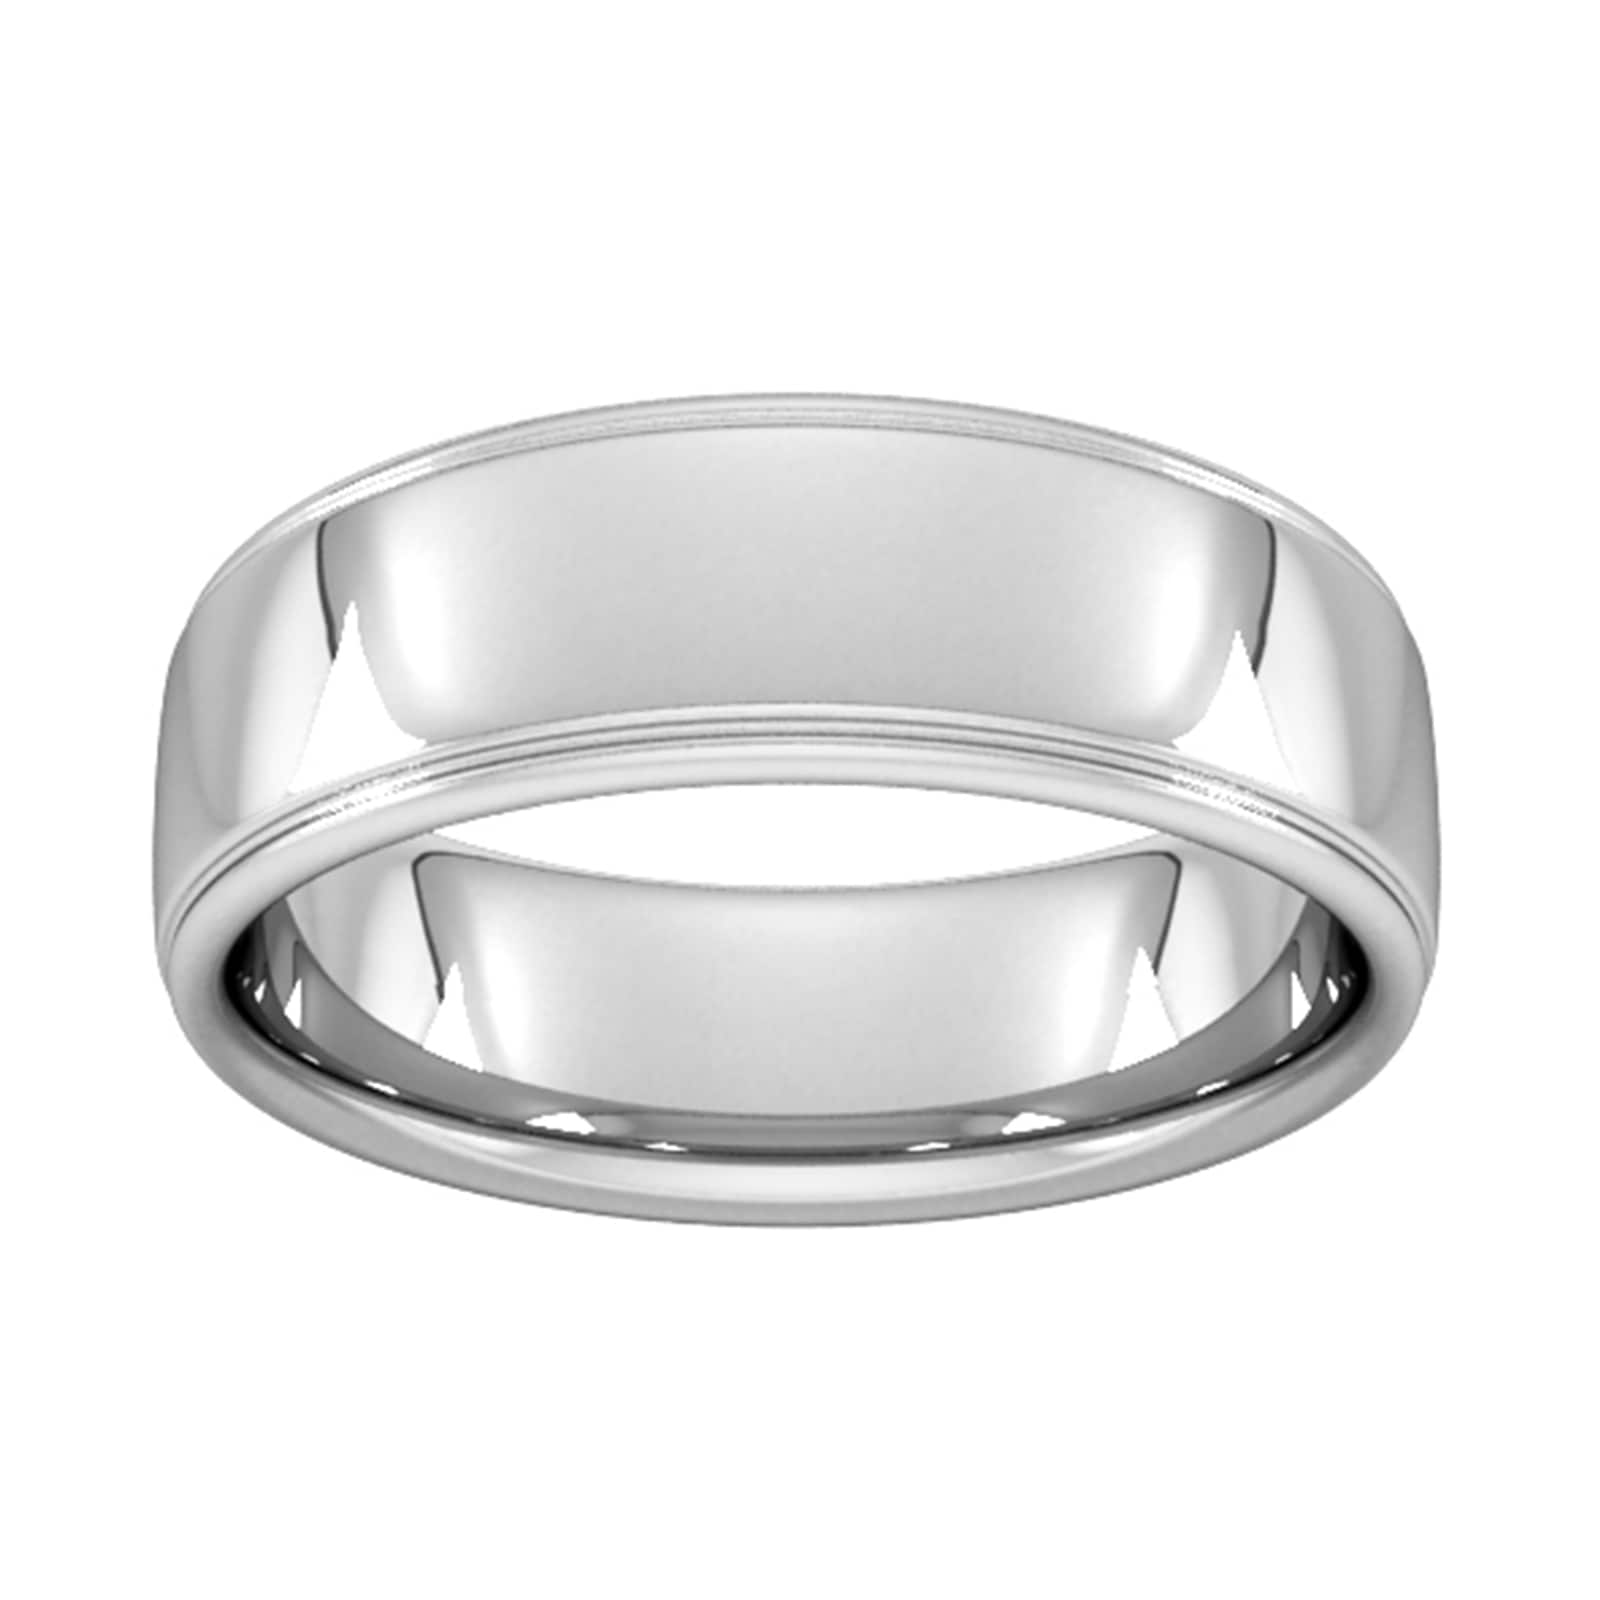 7mm D Shape Heavy Polished Finish With Grooves Wedding Ring In 9 Carat White Gold - Ring Size J